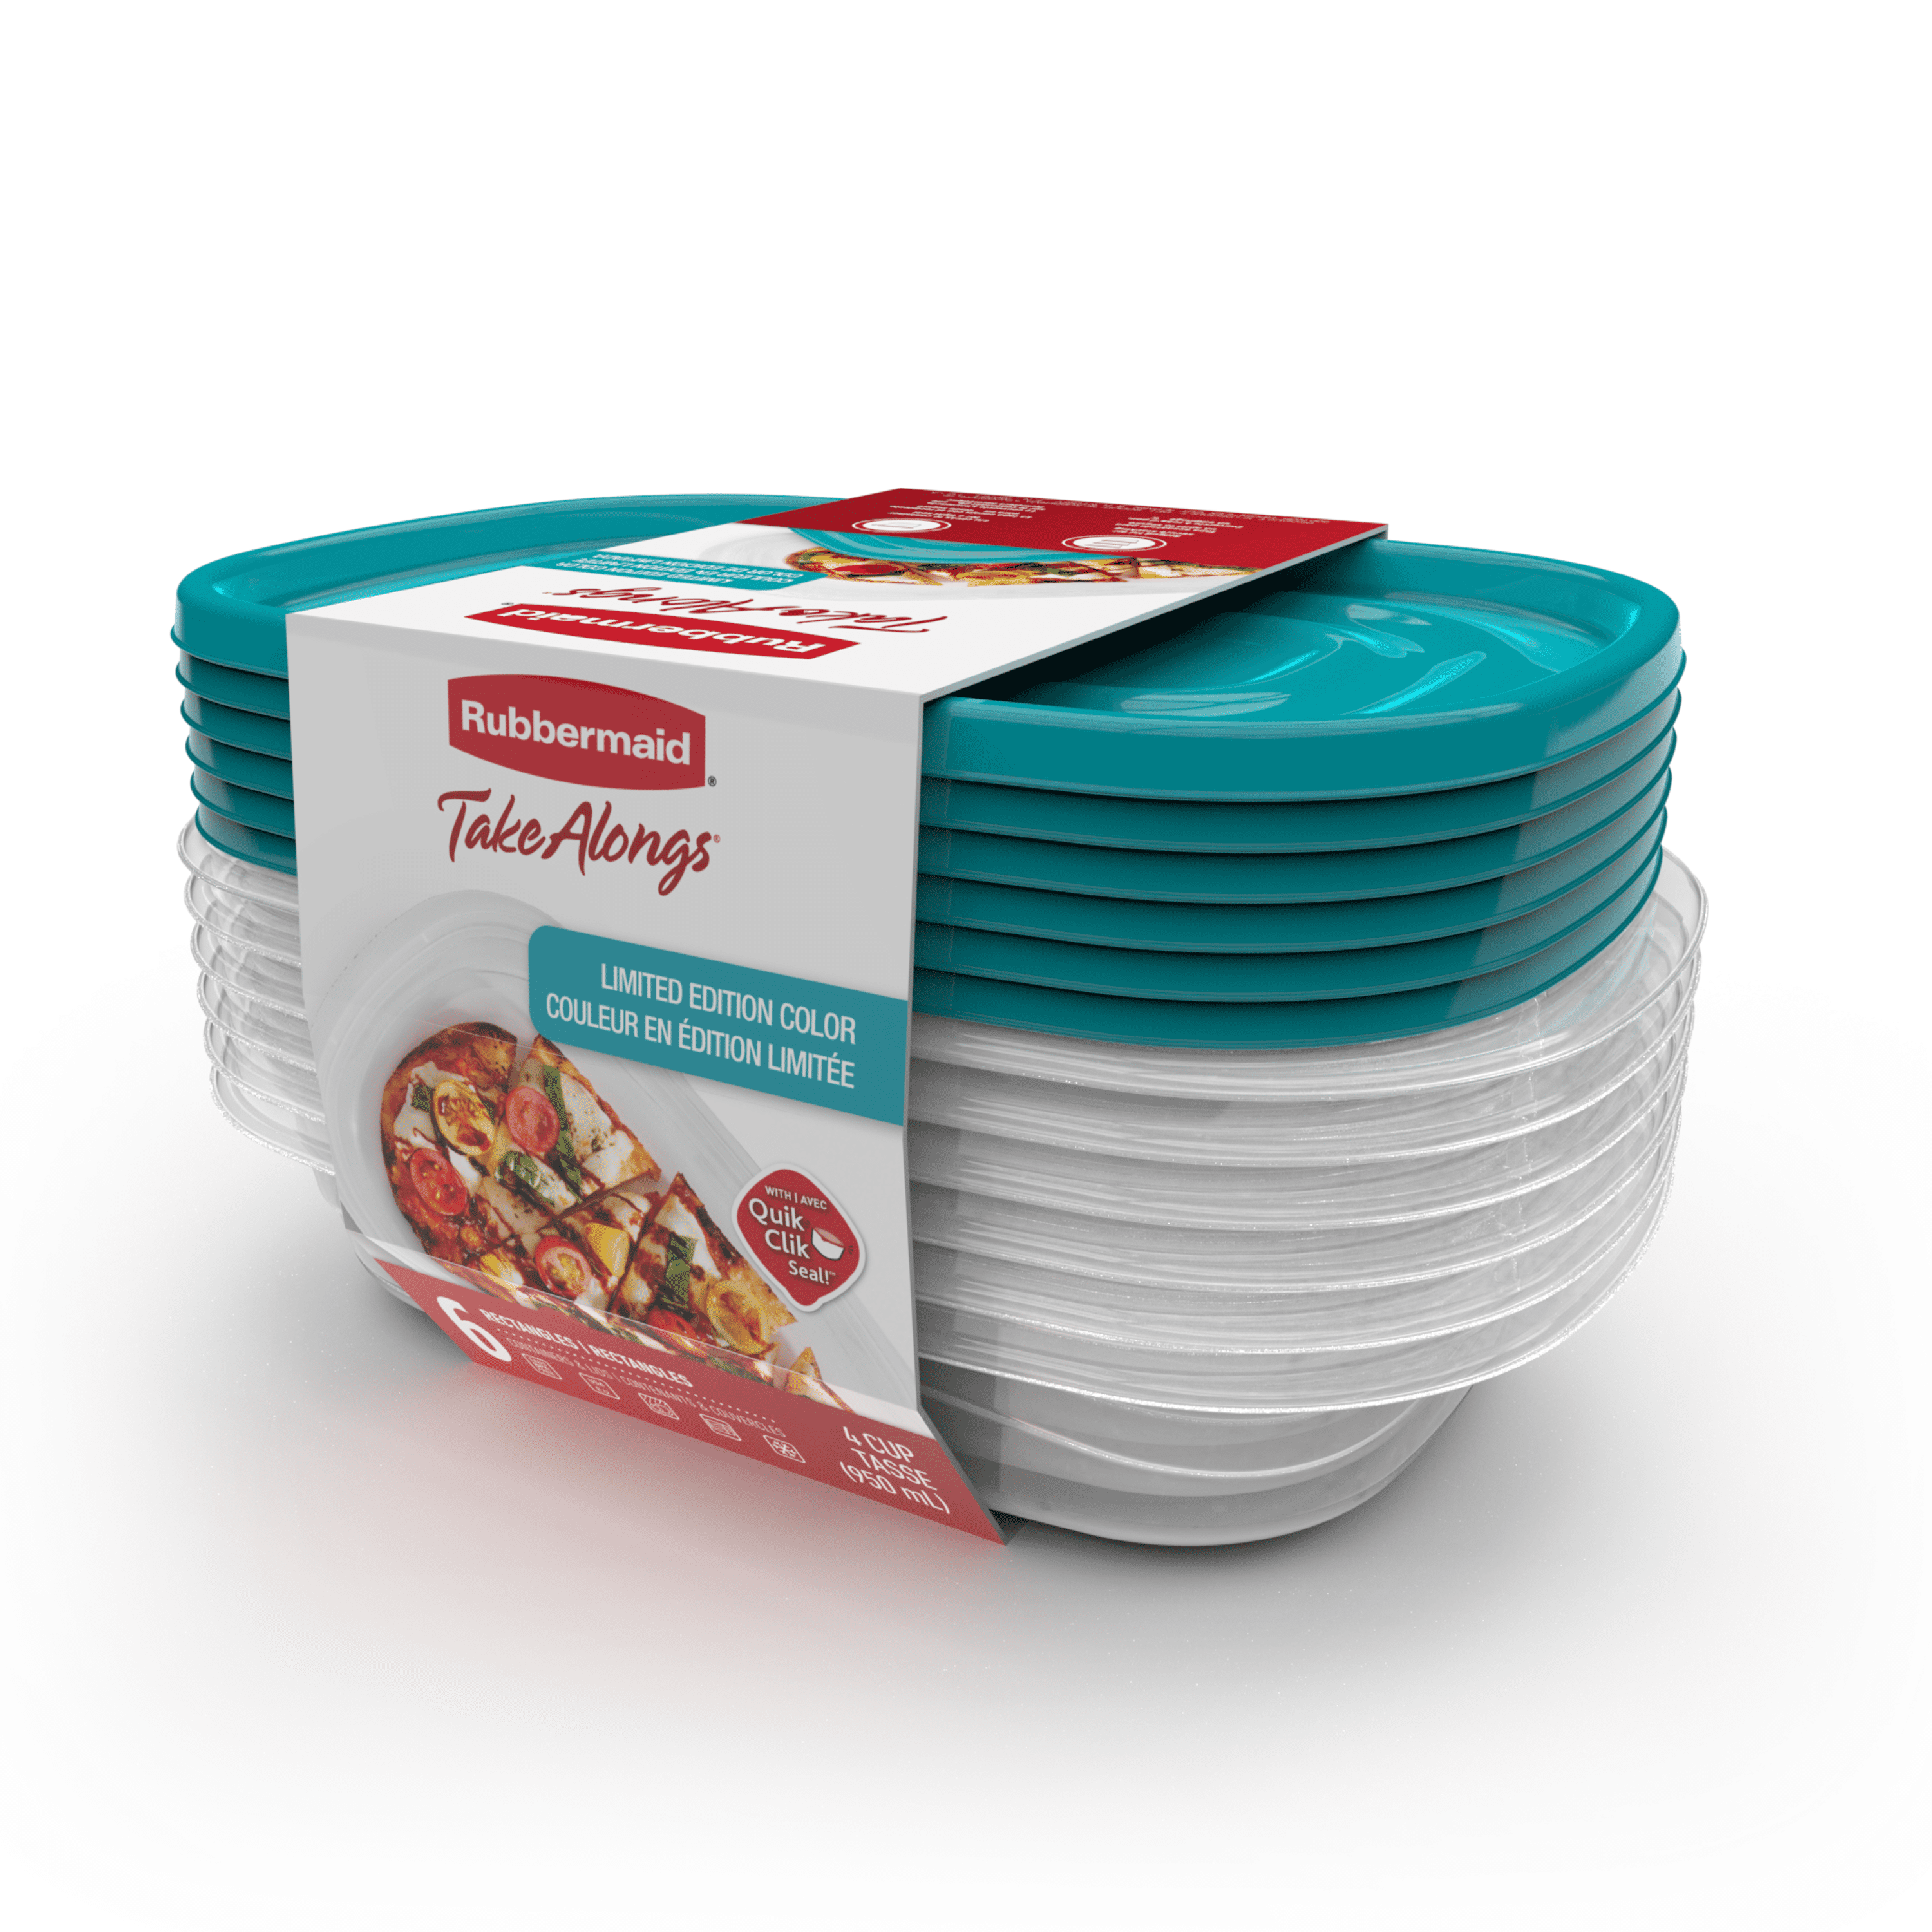 Rubbermaid Set of 4 Food Storage Container Bowls with Lids 4 Colors 4 Sizes